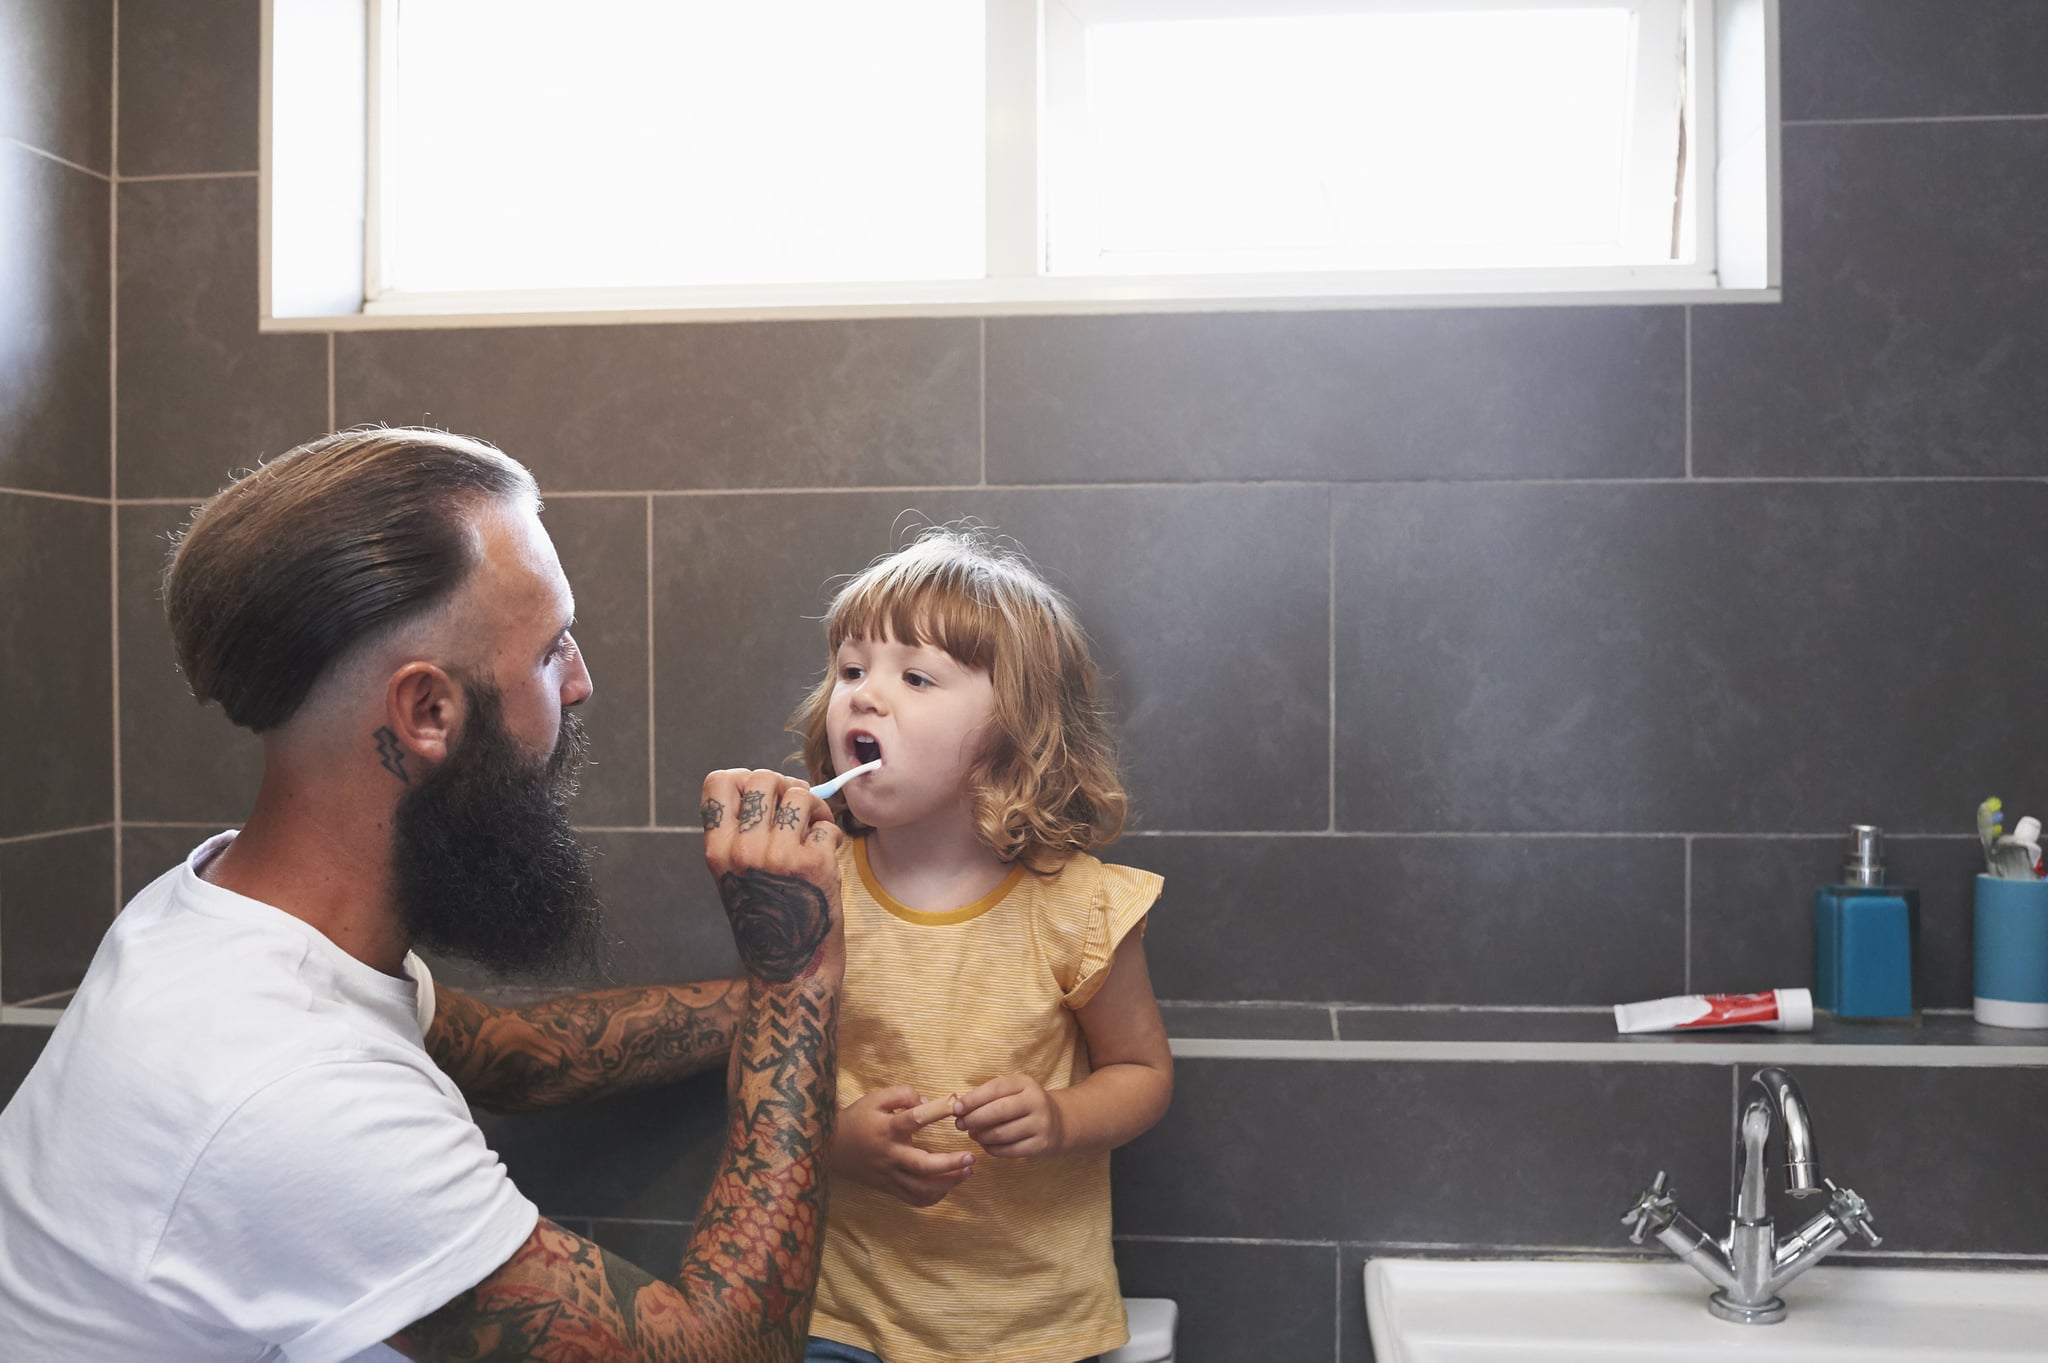 Daughter stands on WC so that Dad can brush her teeth